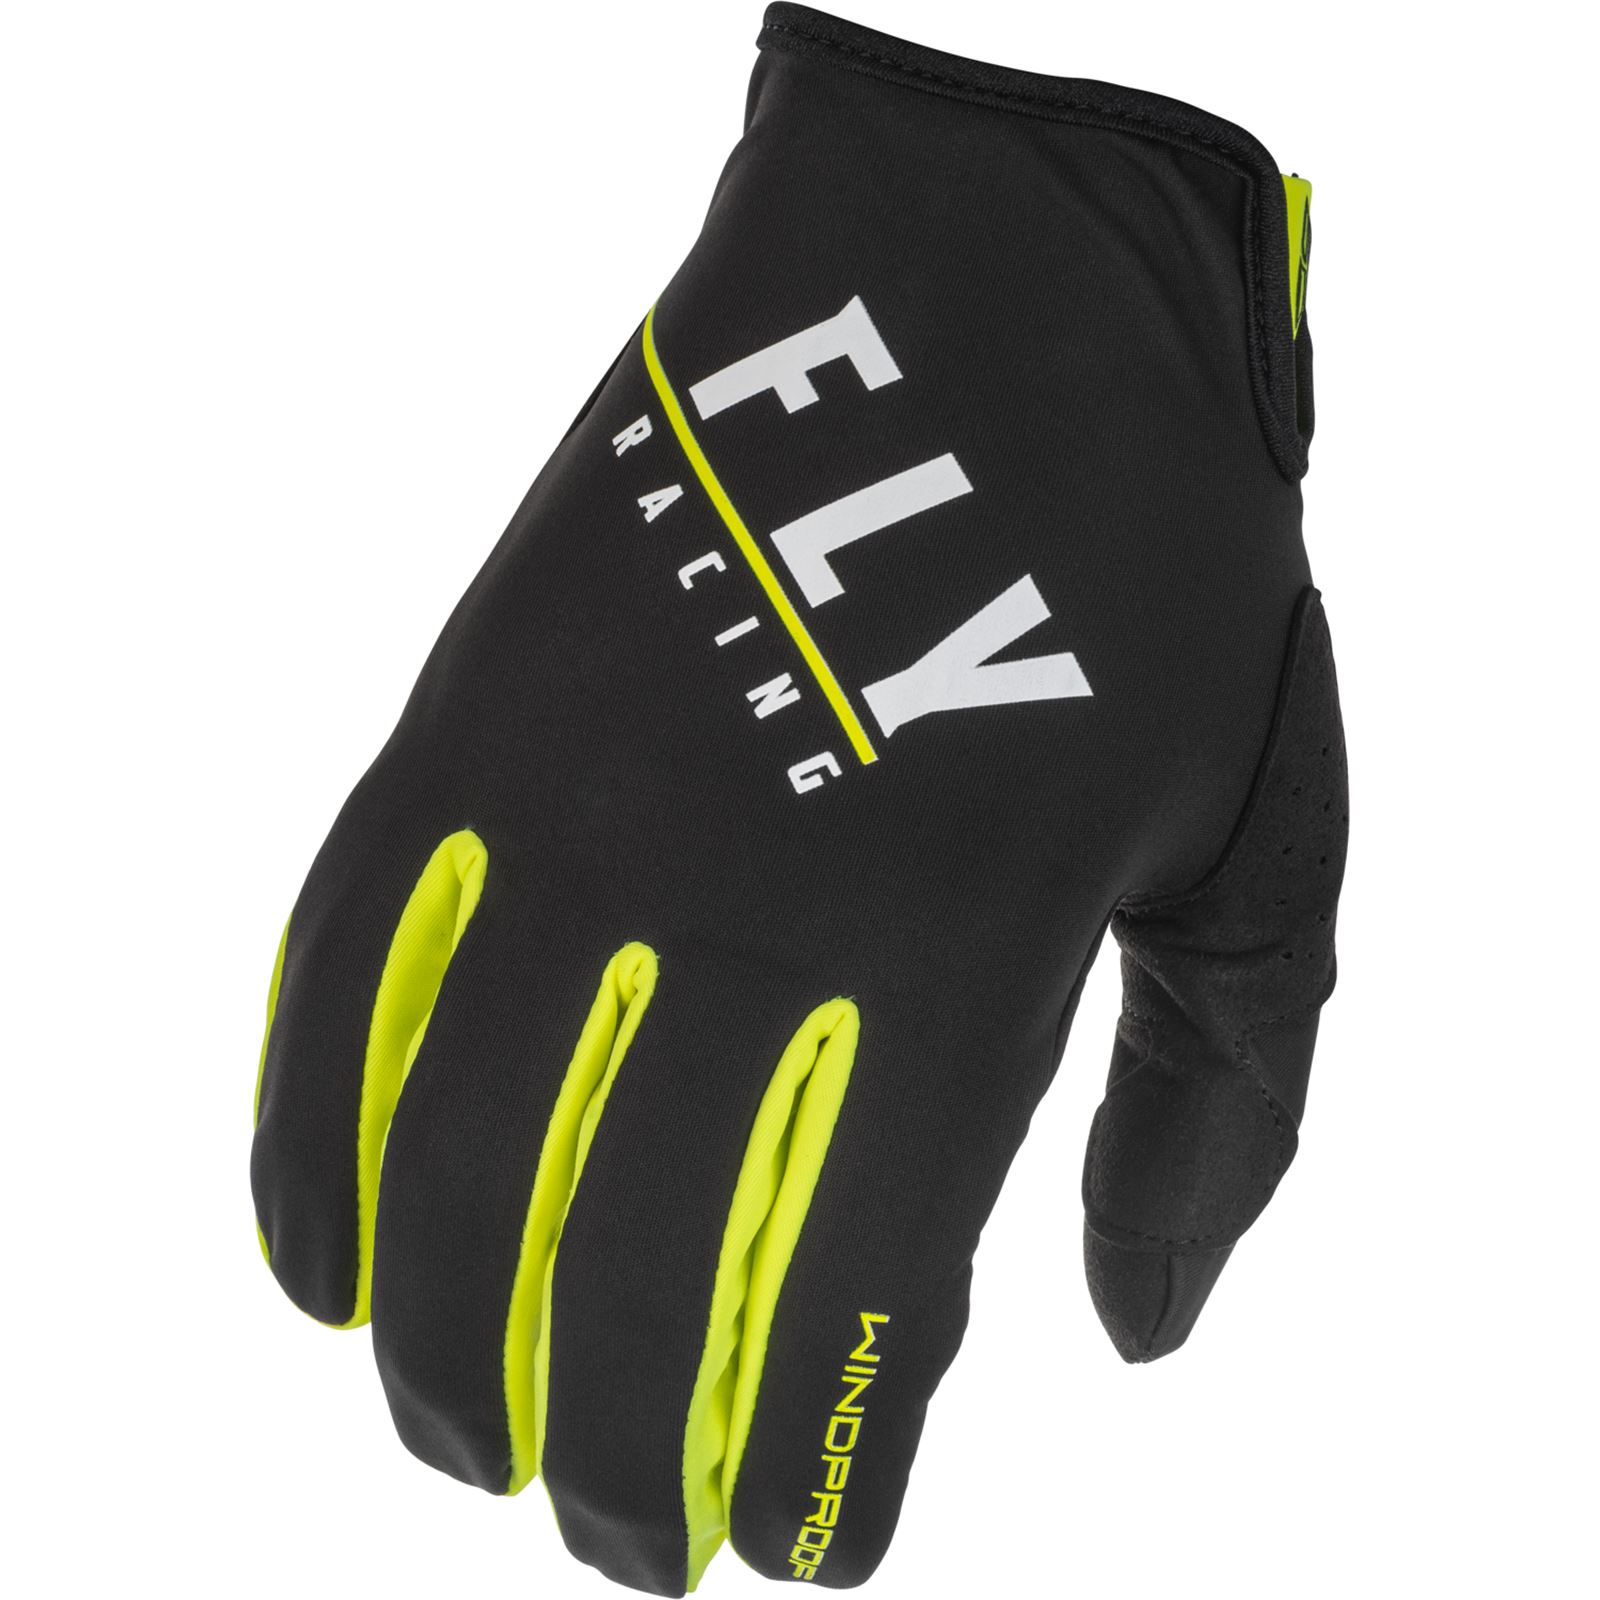 Fly Racing Youth Windproof Gloves, Black/Hi-Vis Size 06